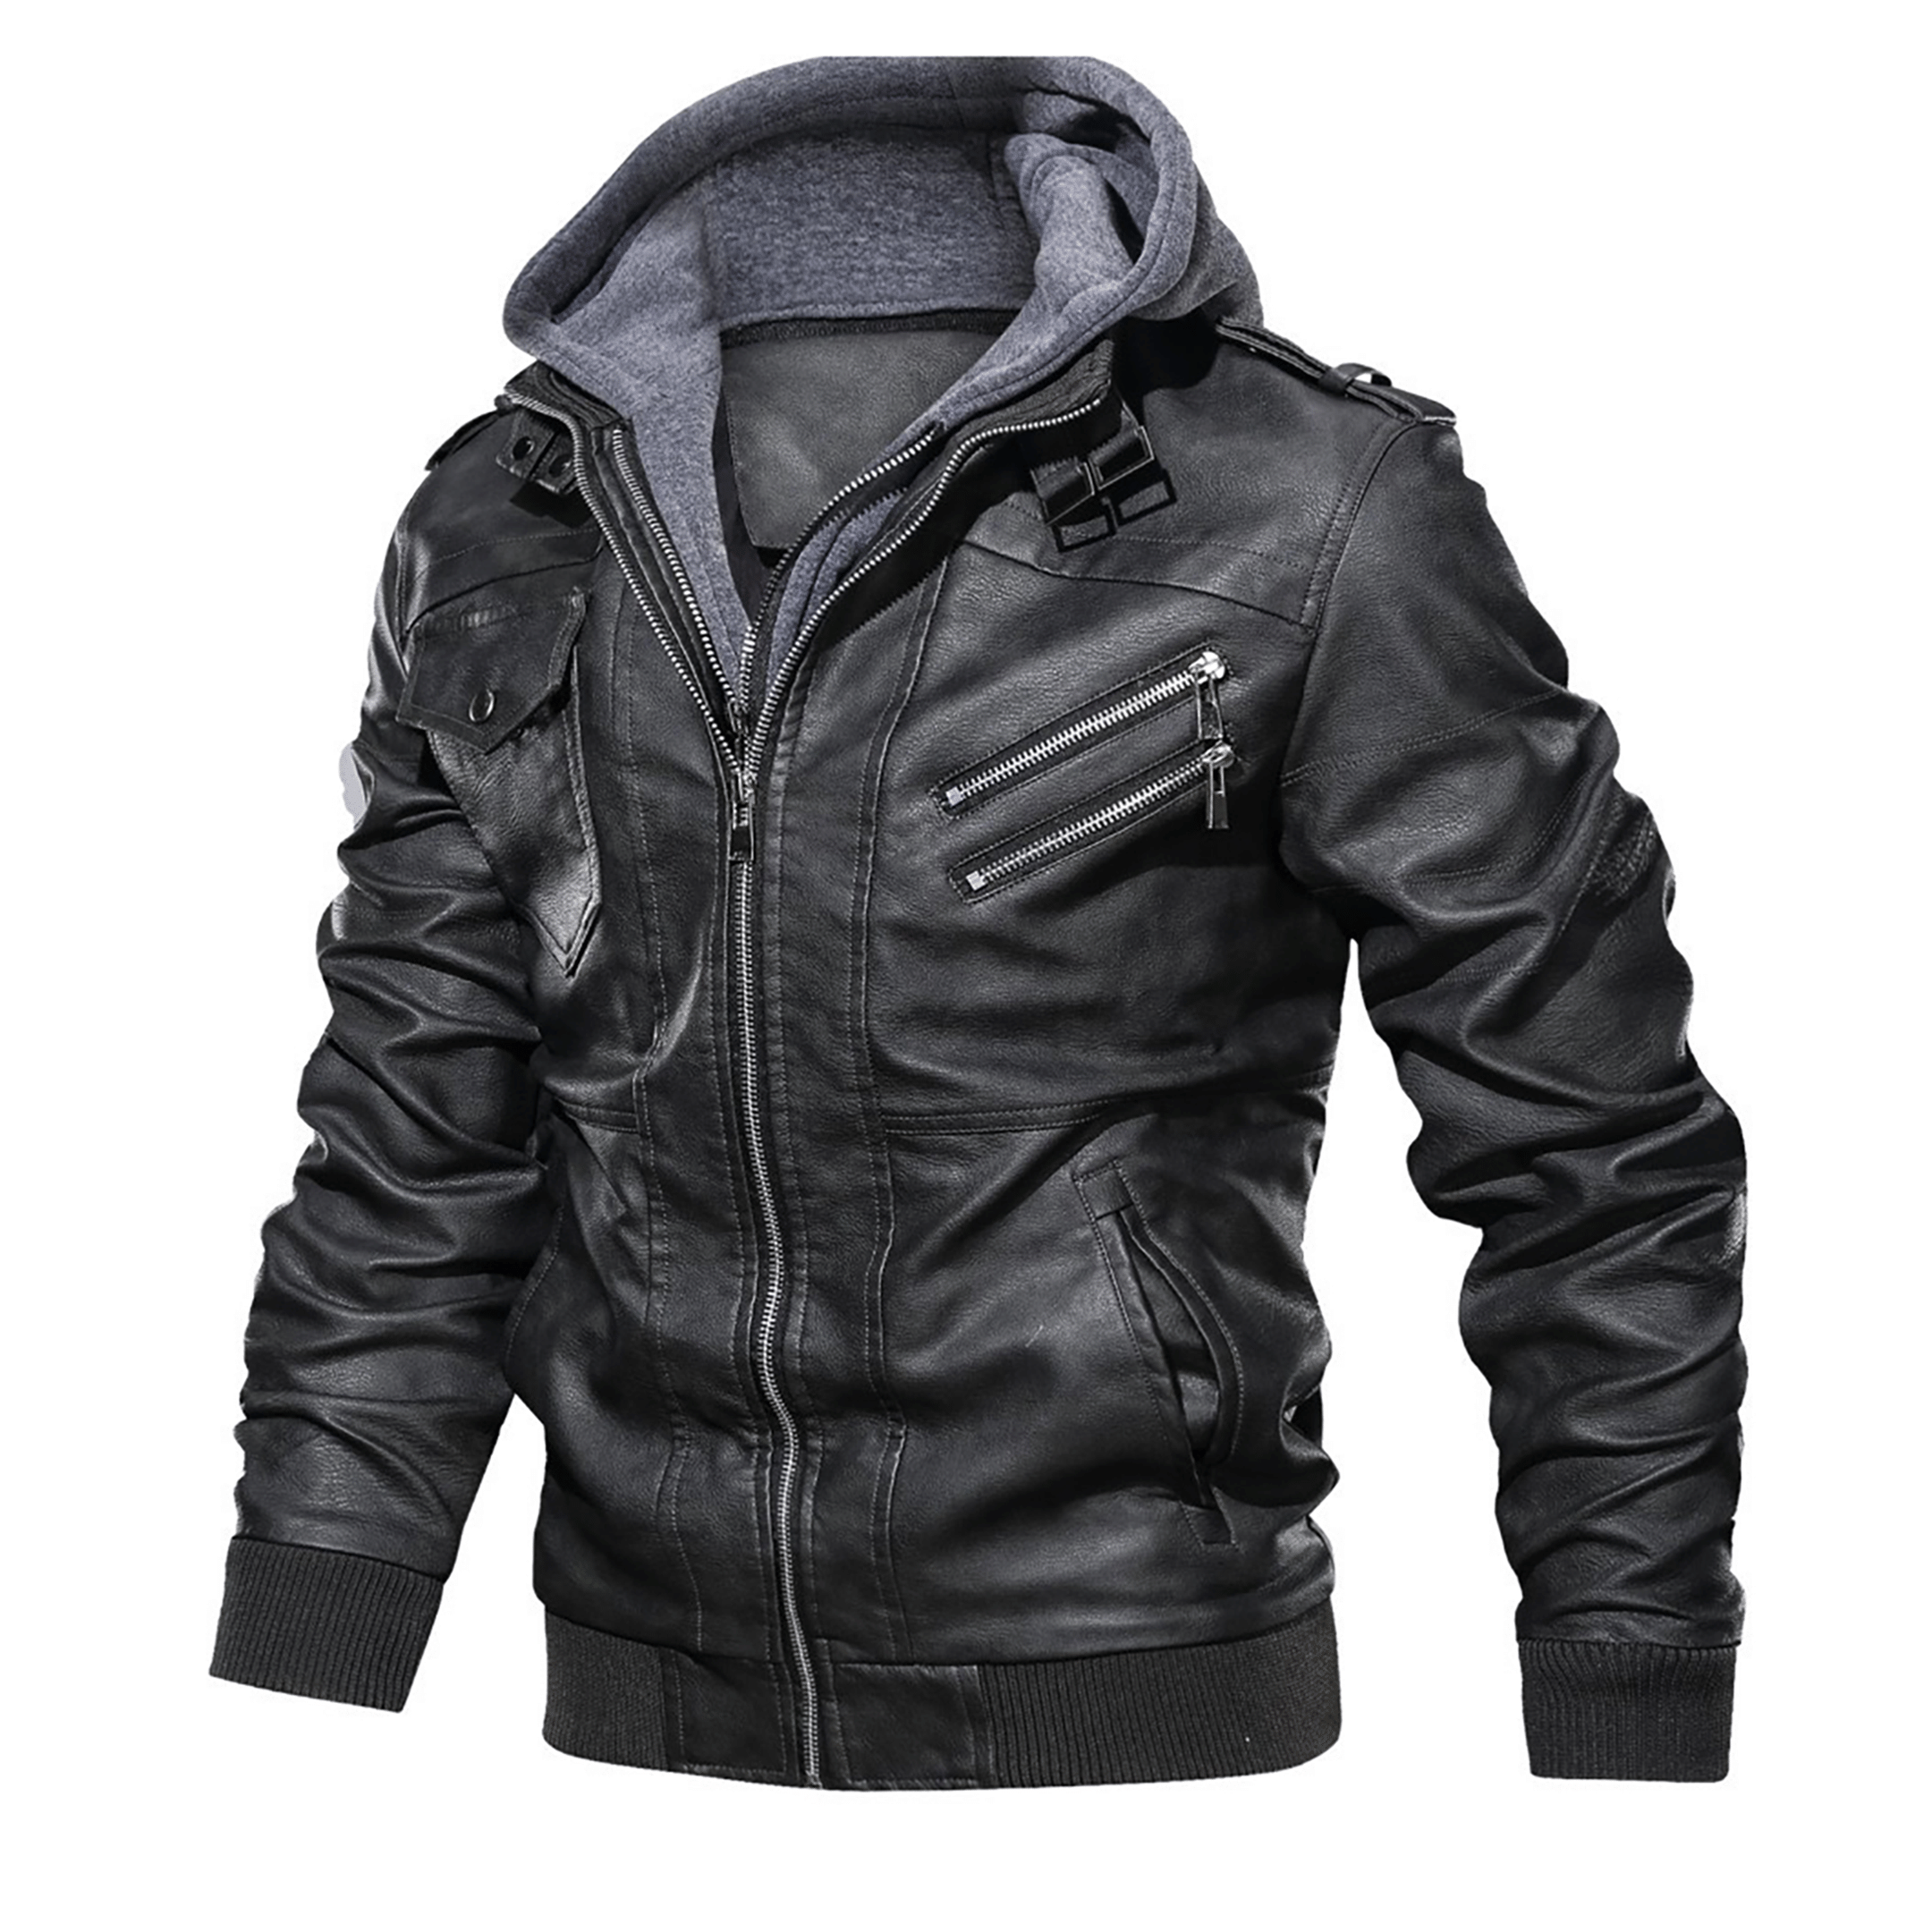 Top leather jackets and latest products 289